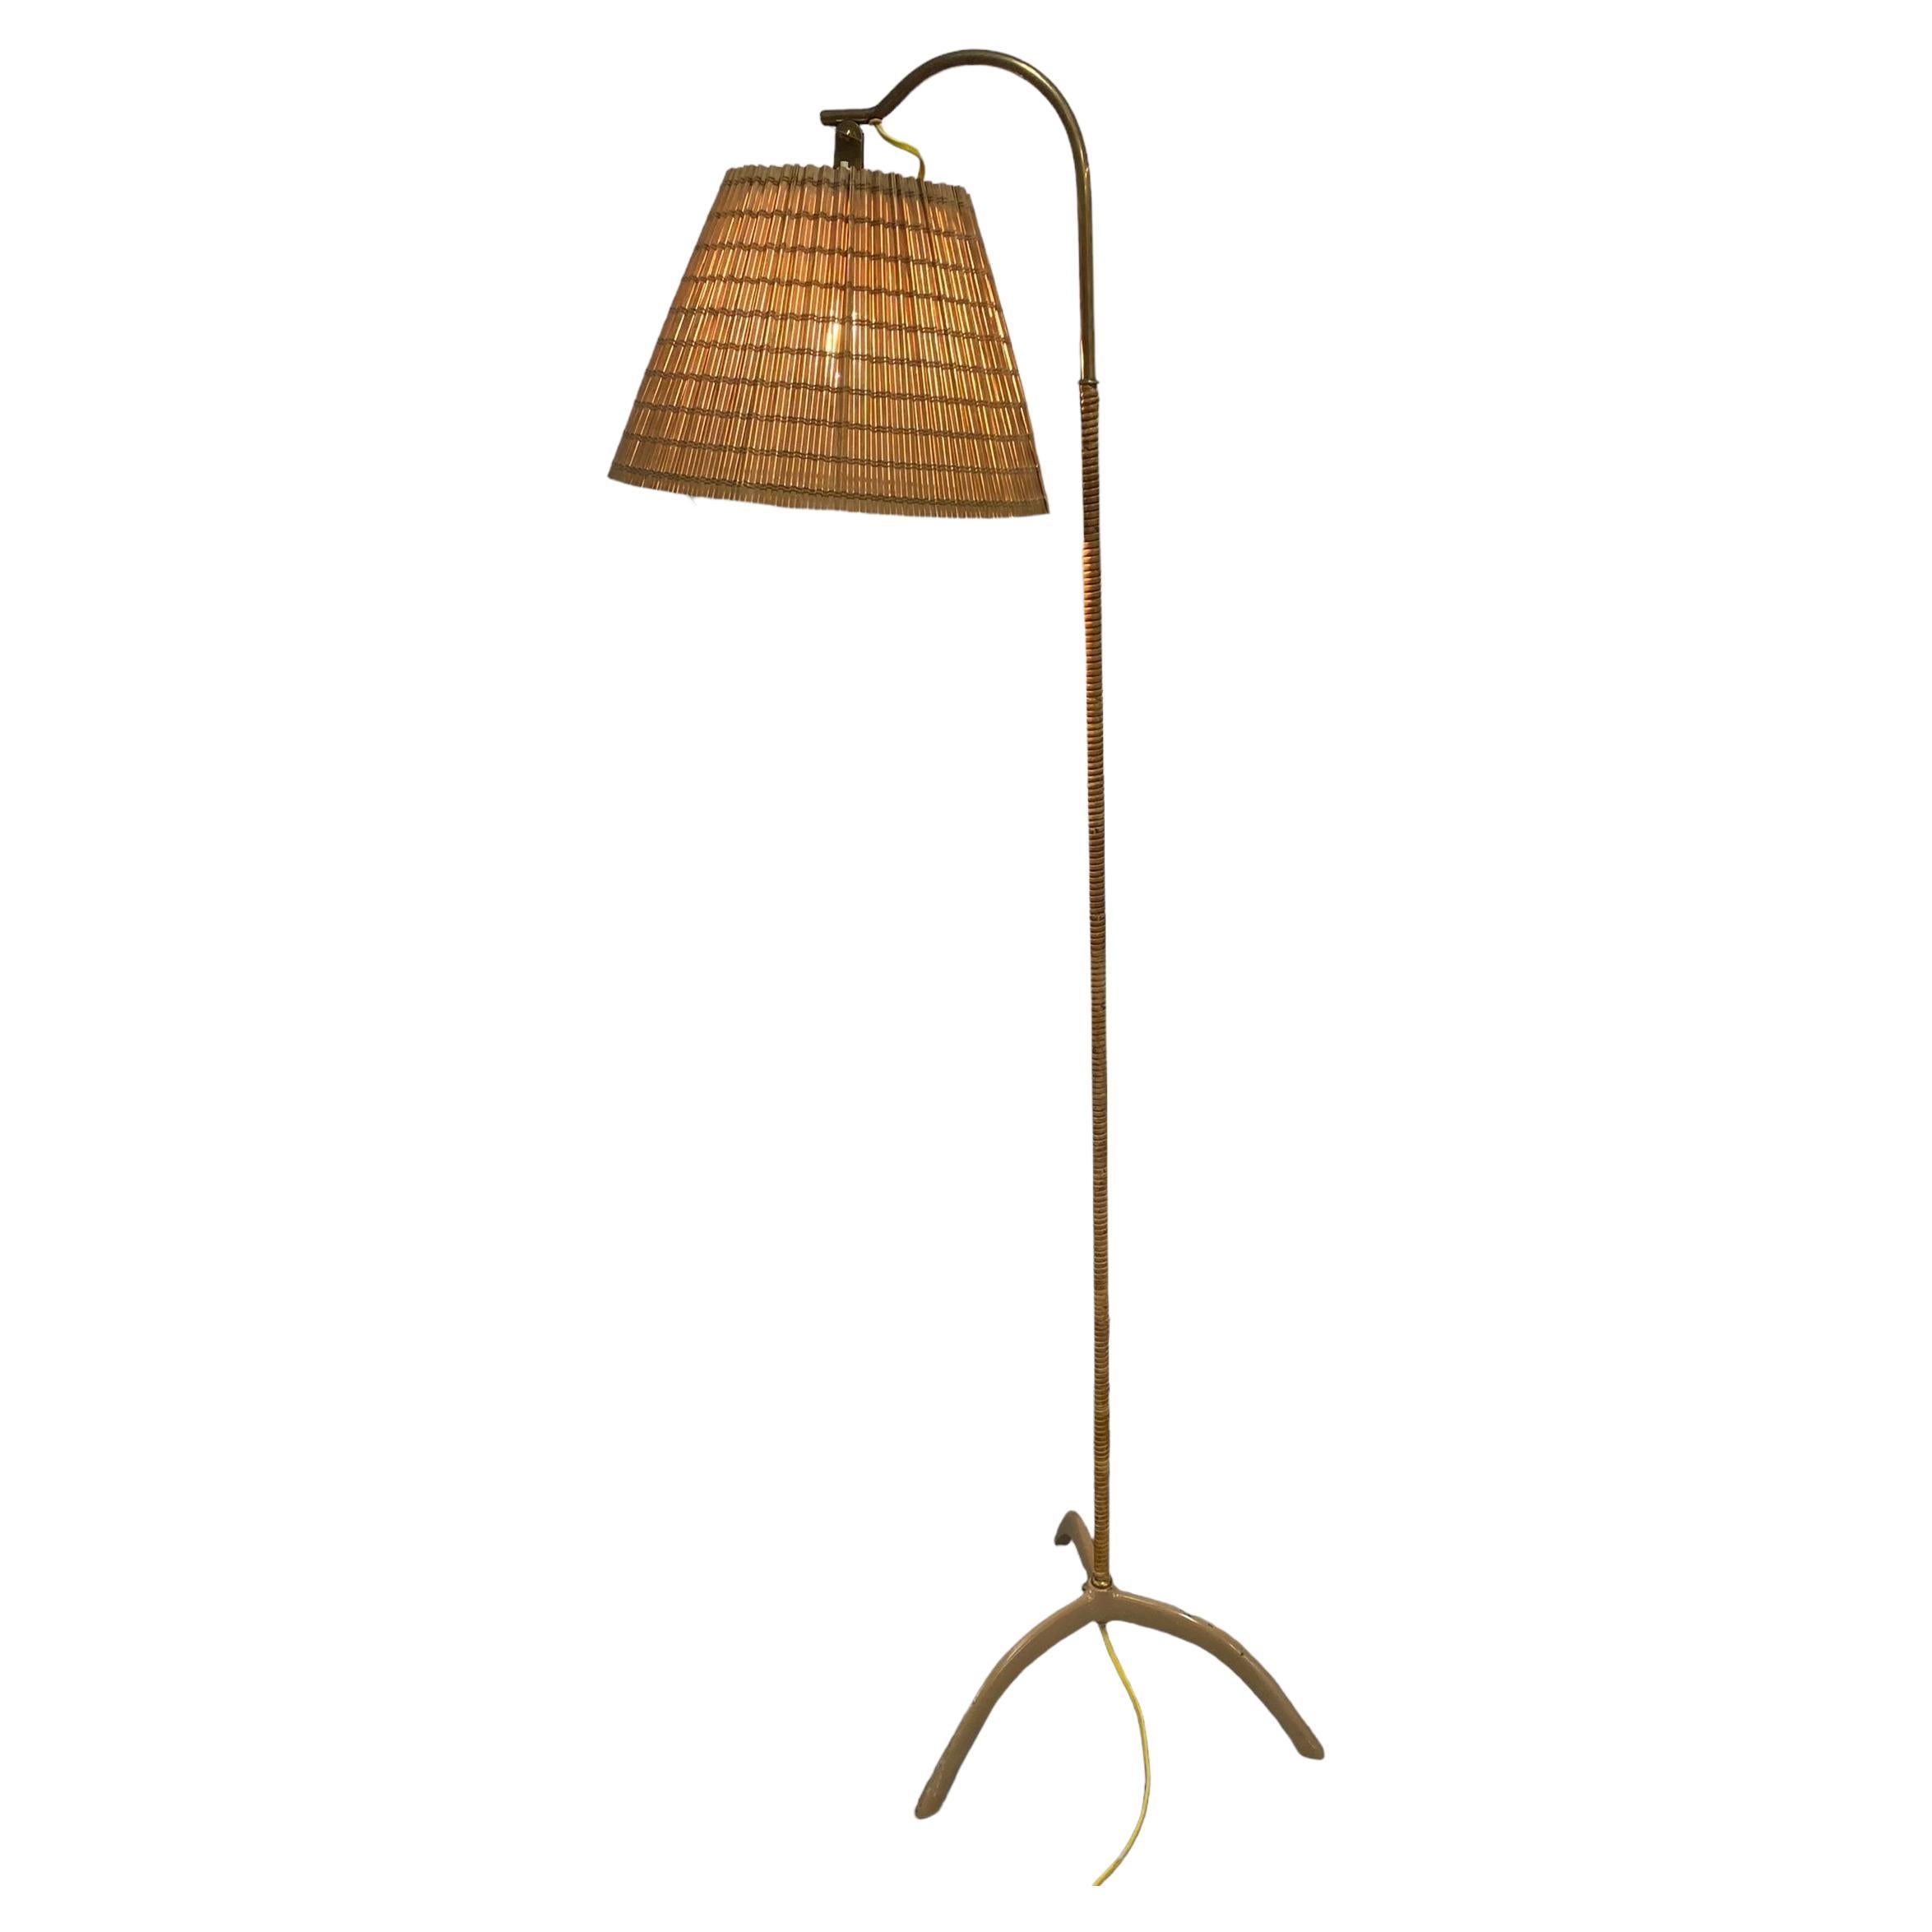 Paavo Tynell Floor Lamp model. 9609, Taito Oy 1950s For Sale